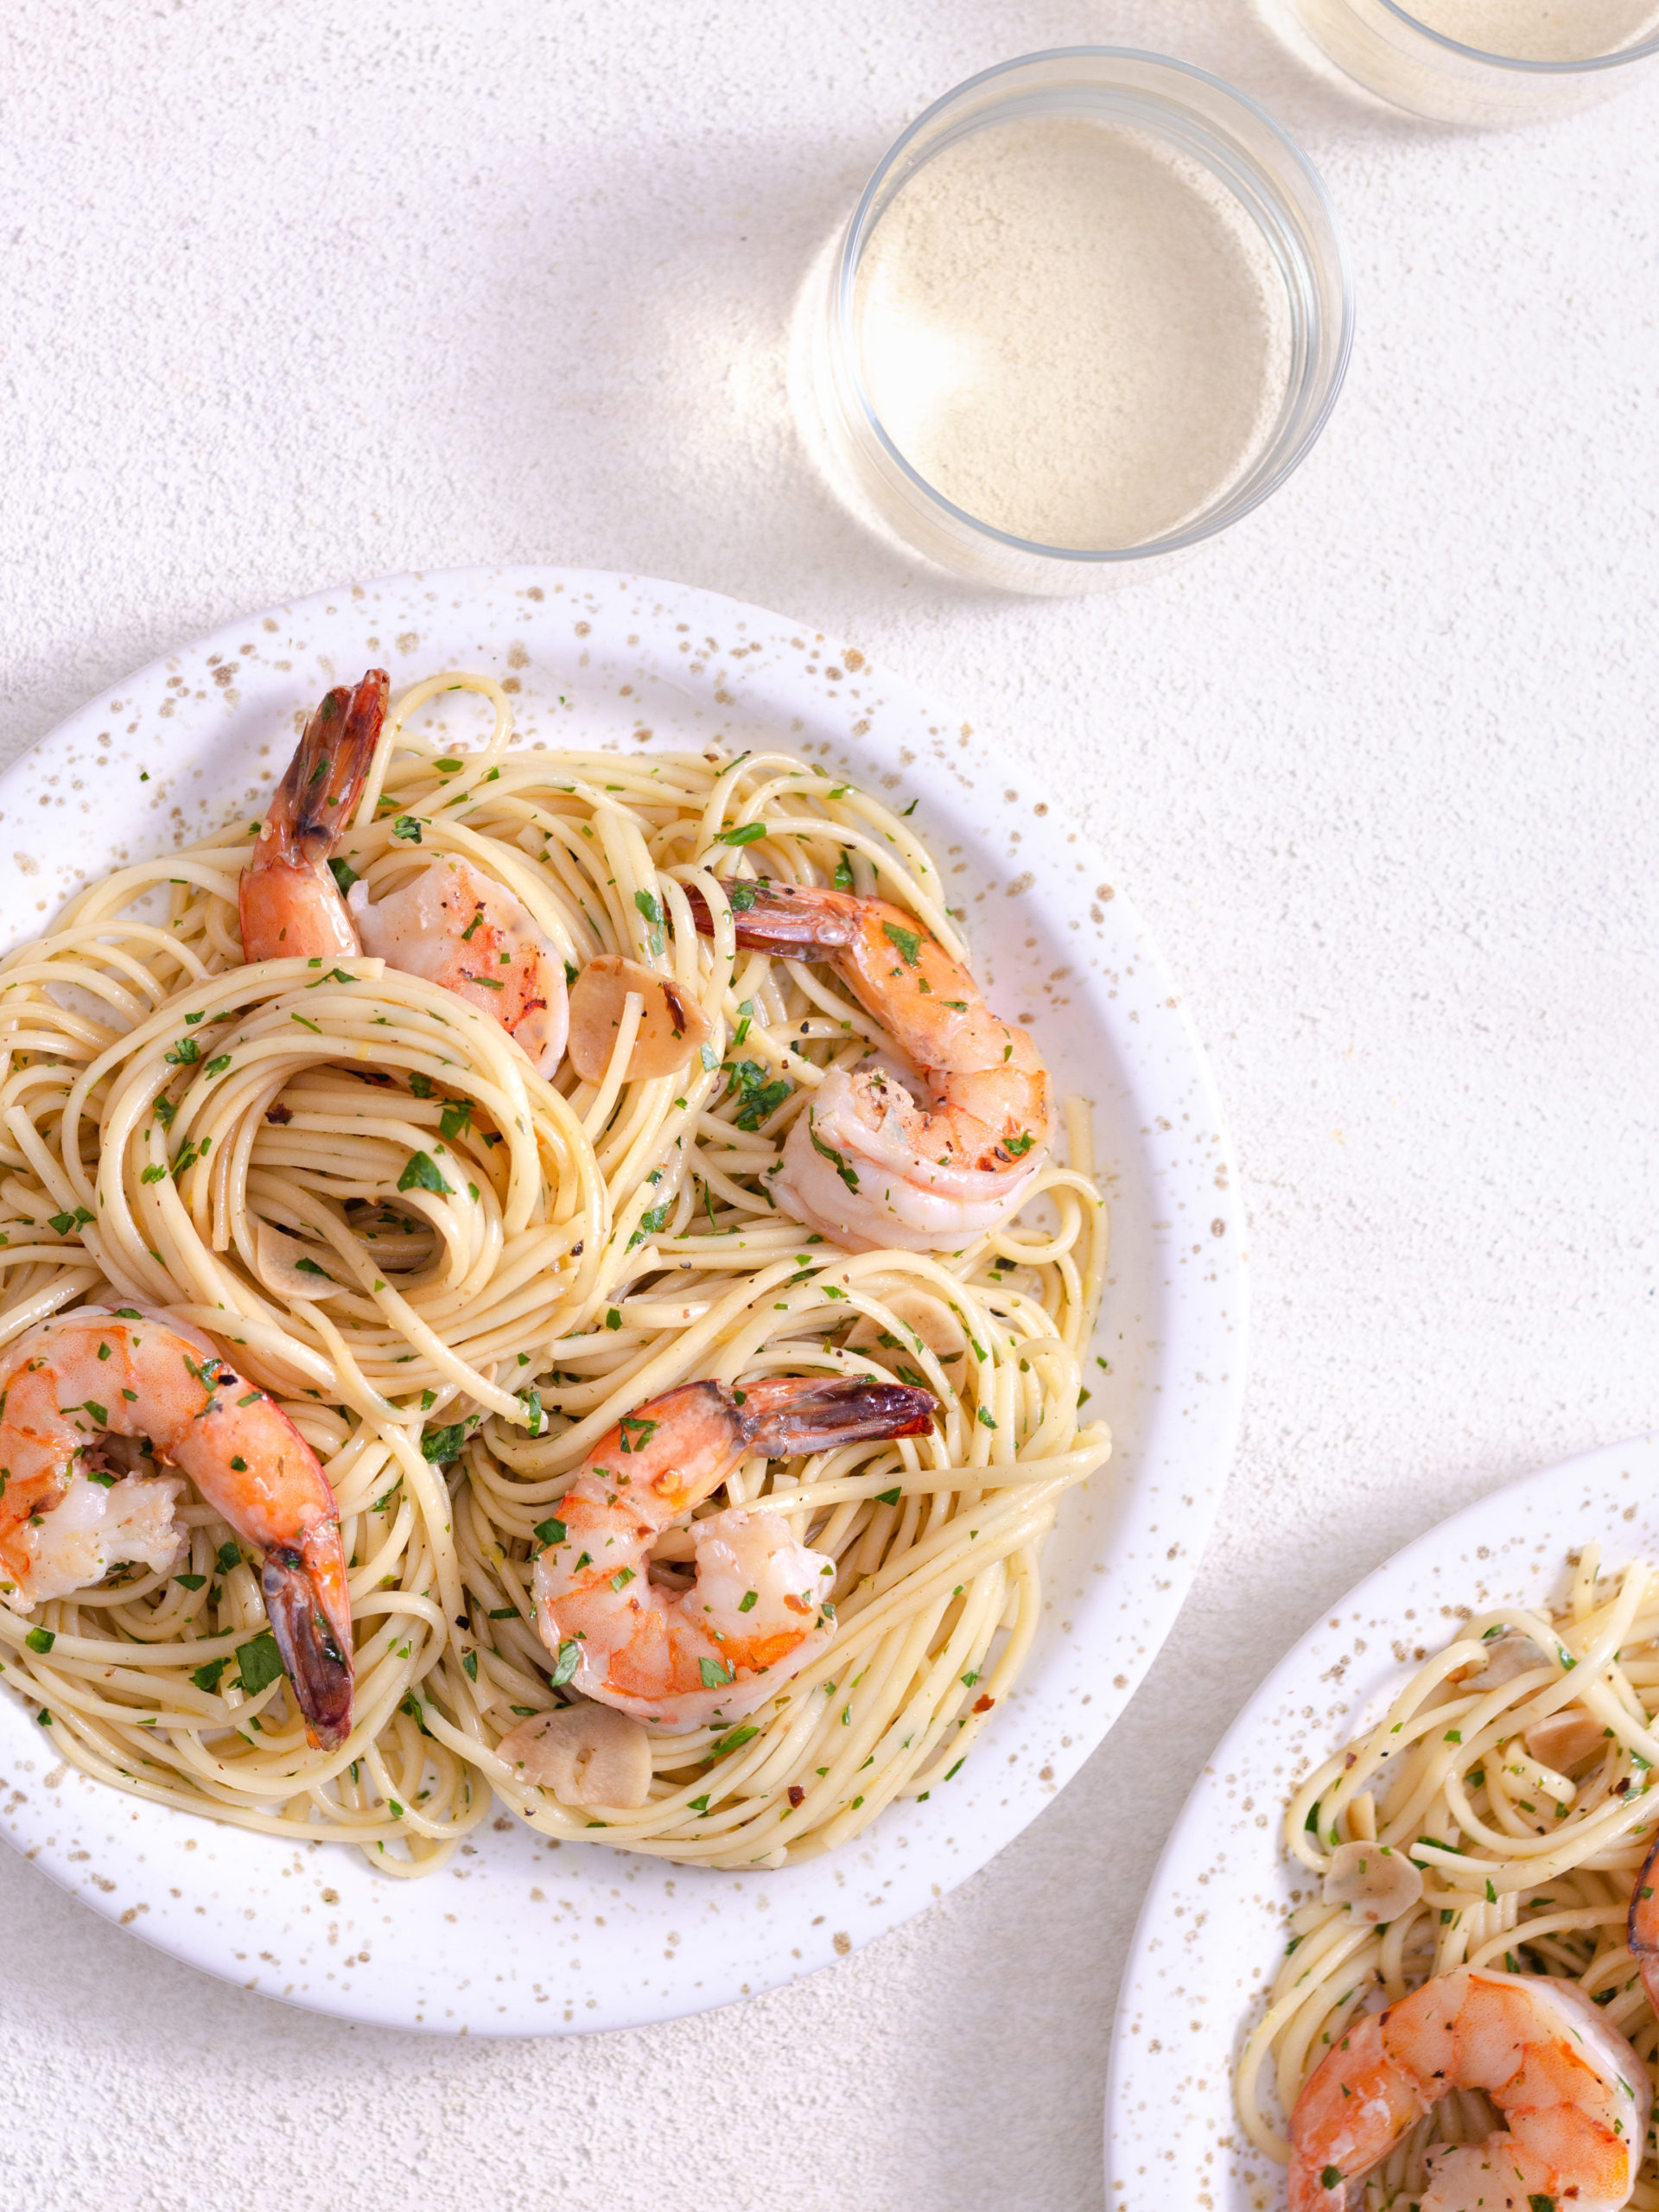 Overhead view of two plates of shrimp pasta on a light surface next to glasses of white wine.